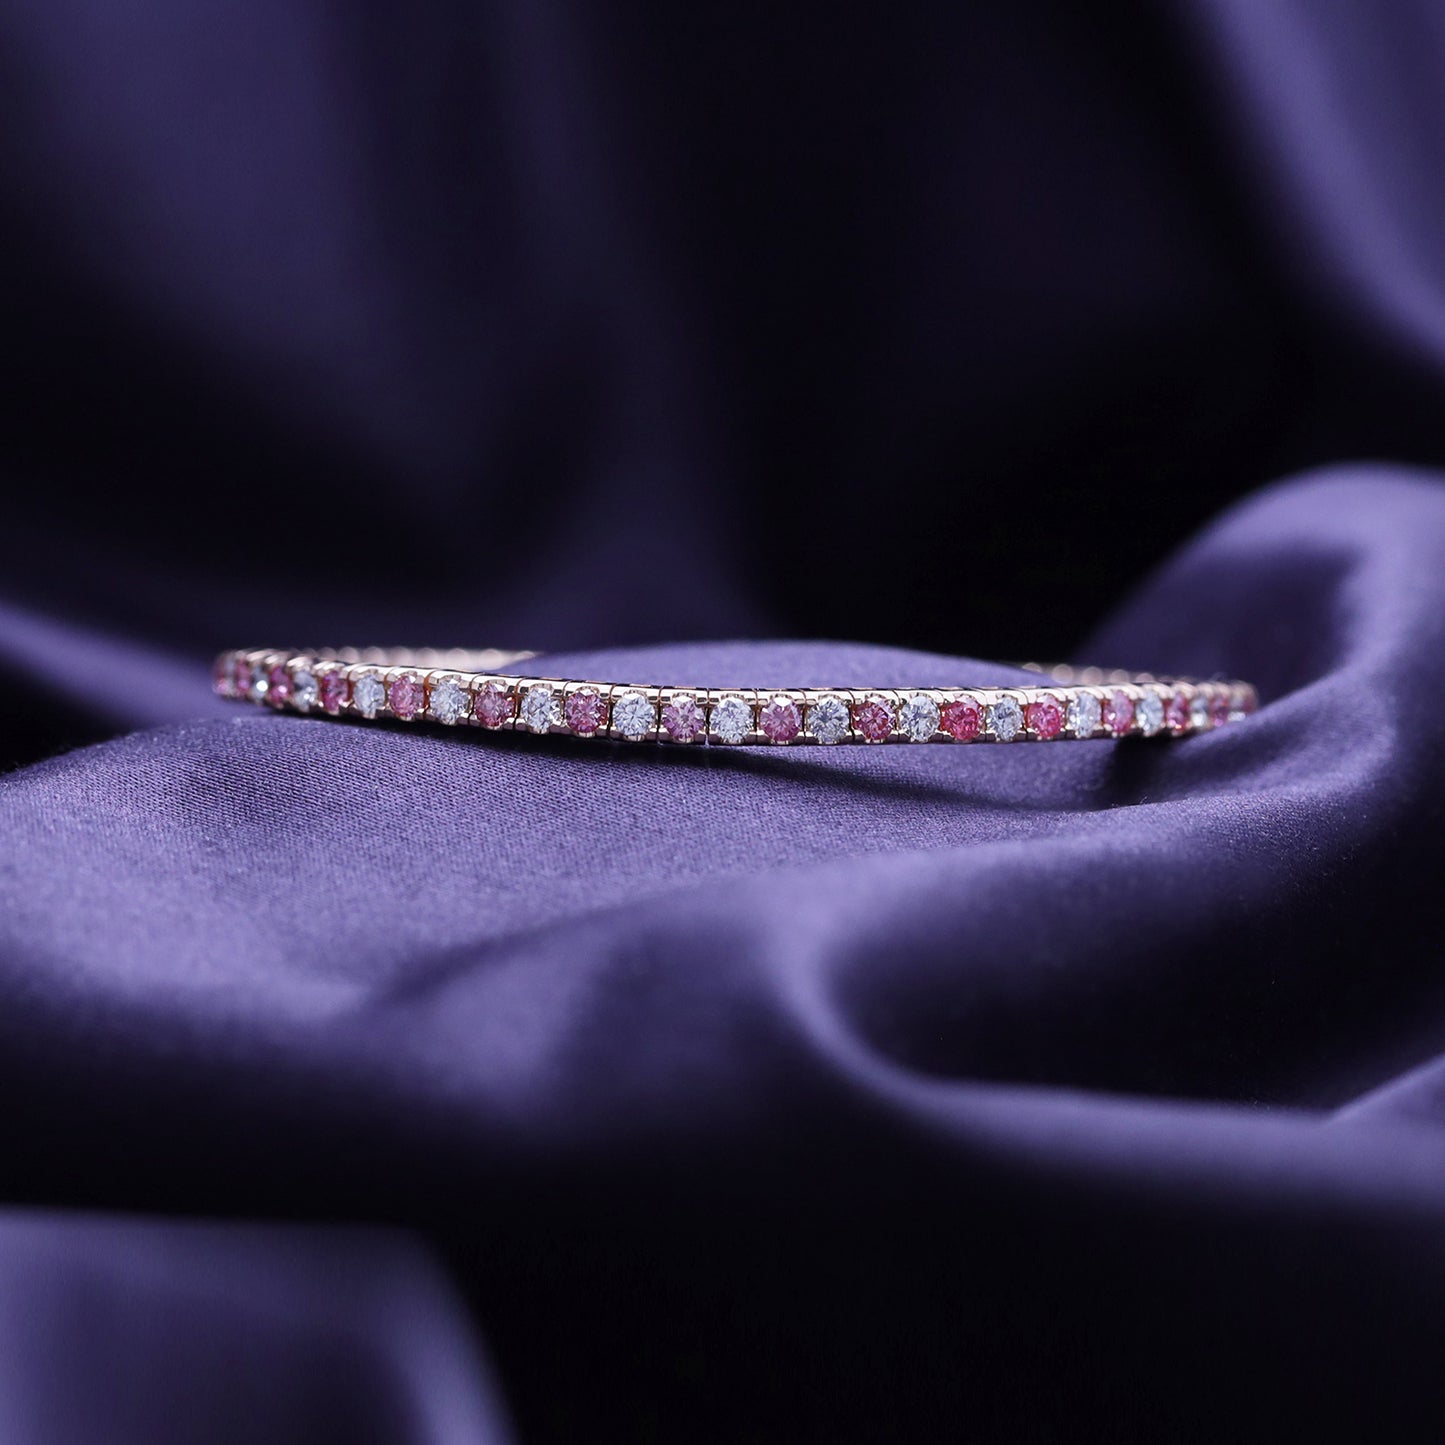 2.20MM Round Cut Pink And White IGI Certified Lab Grown Diamond Stretchable Tennis Bracelet In 10K Or 14K Solid Gold